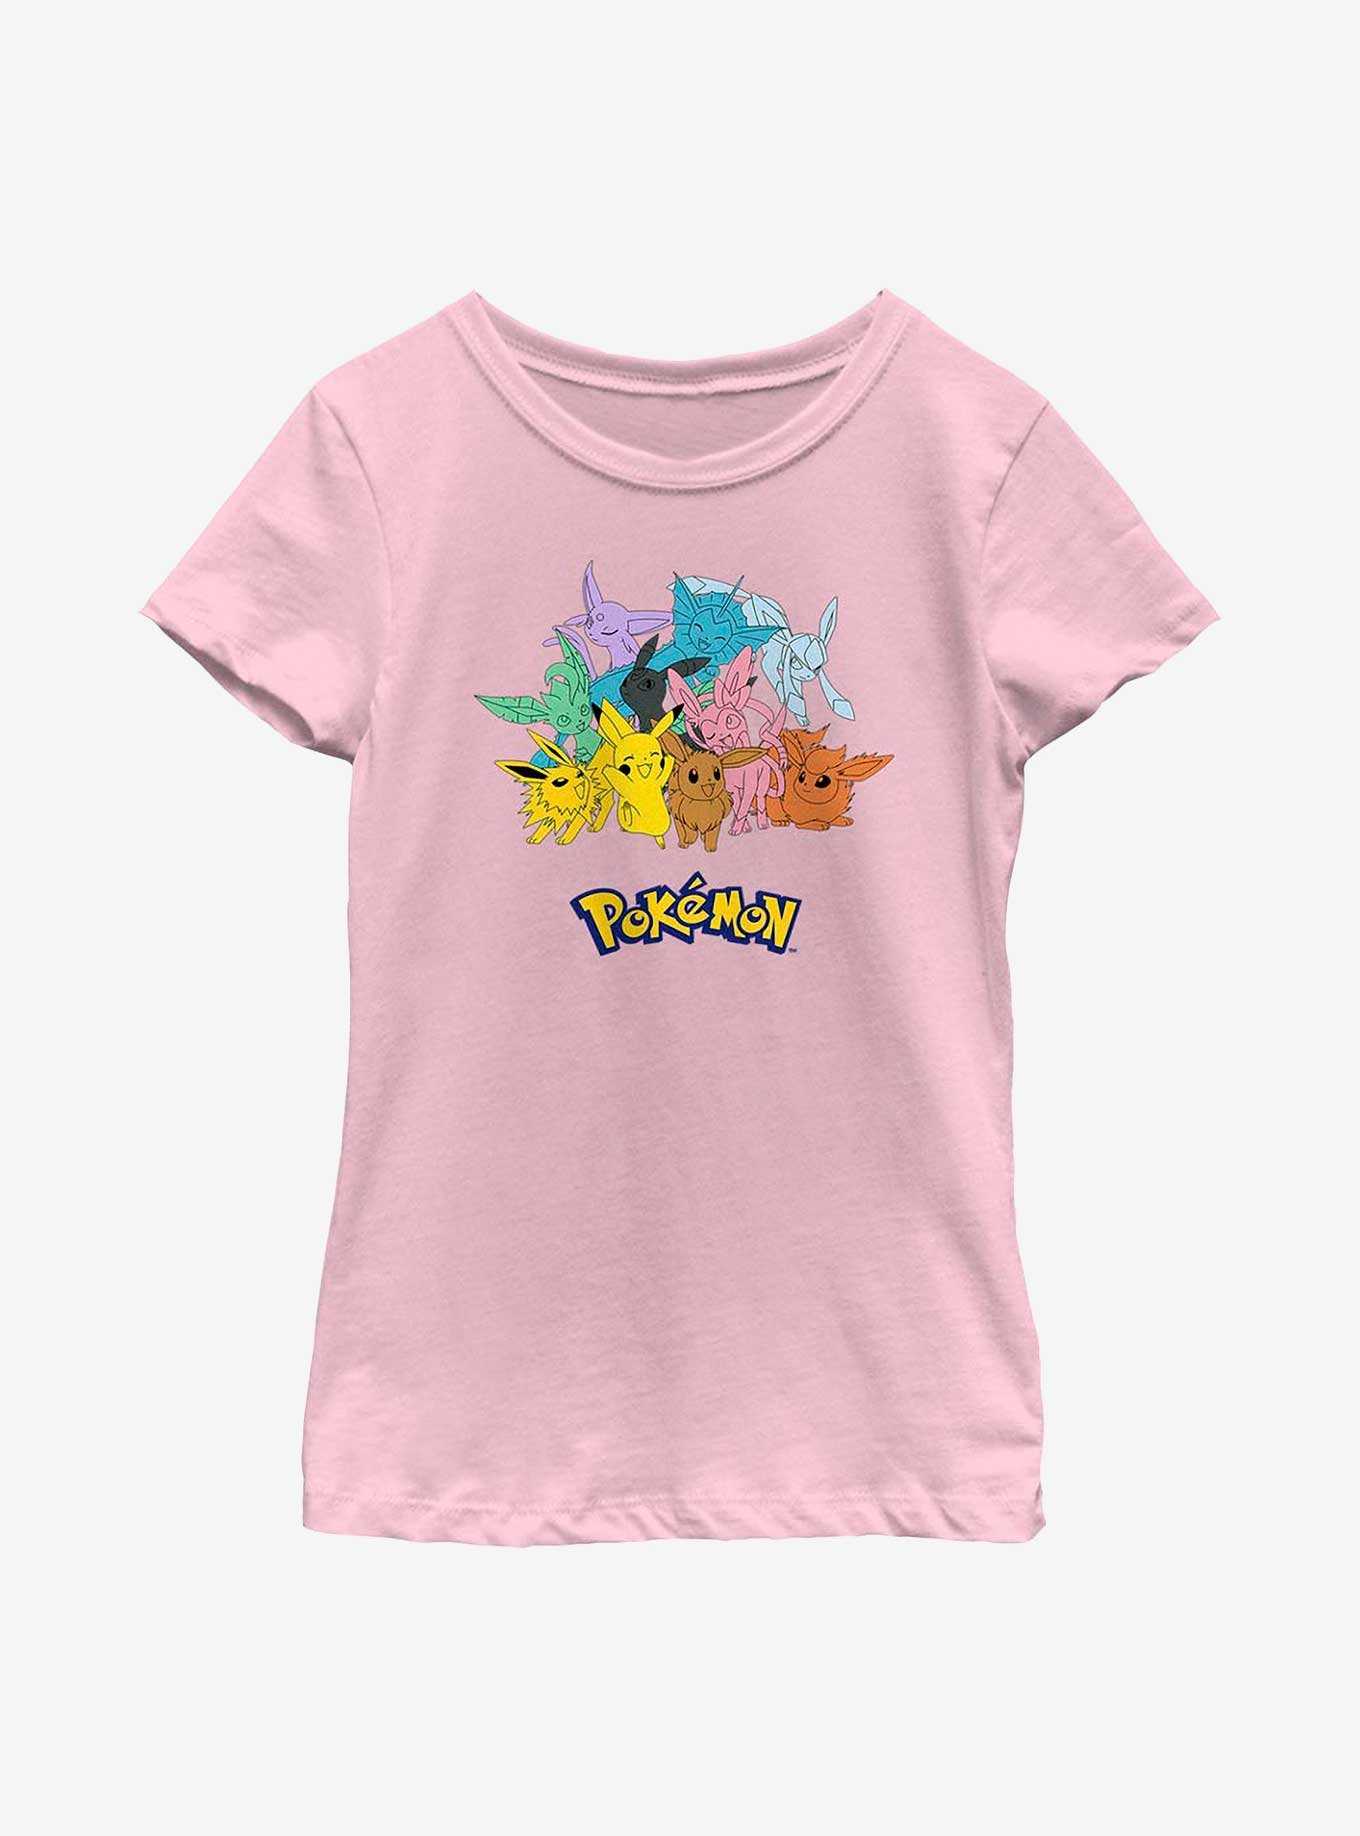 Pokemon Pikachu With Eeveelutions Youth Girls T-Shirt, , hi-res